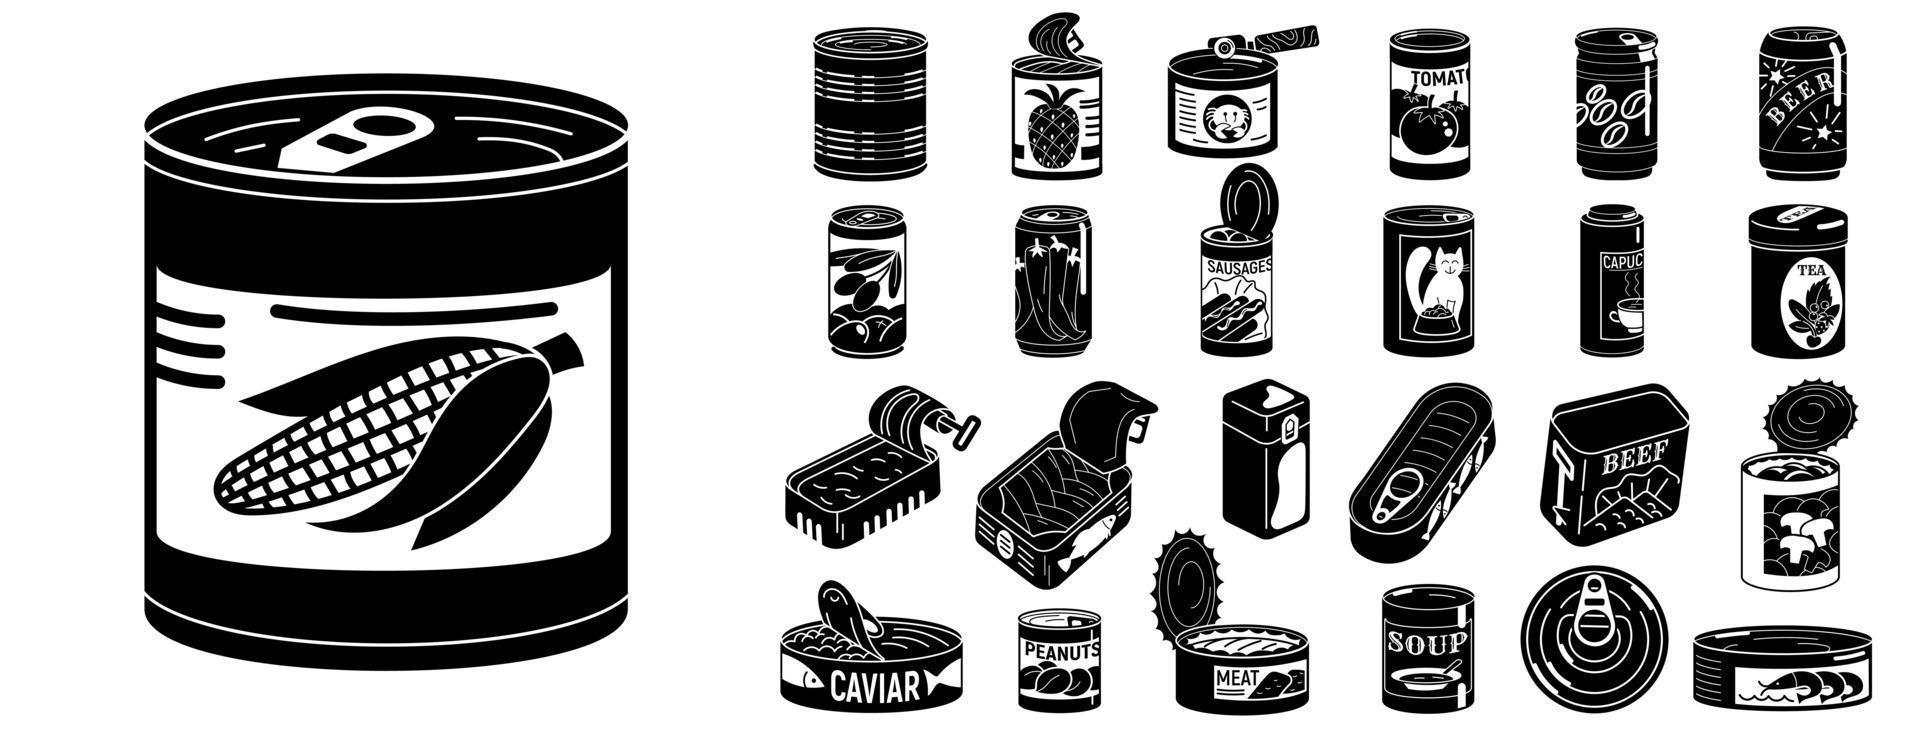 Tin can icons set, simple style vector